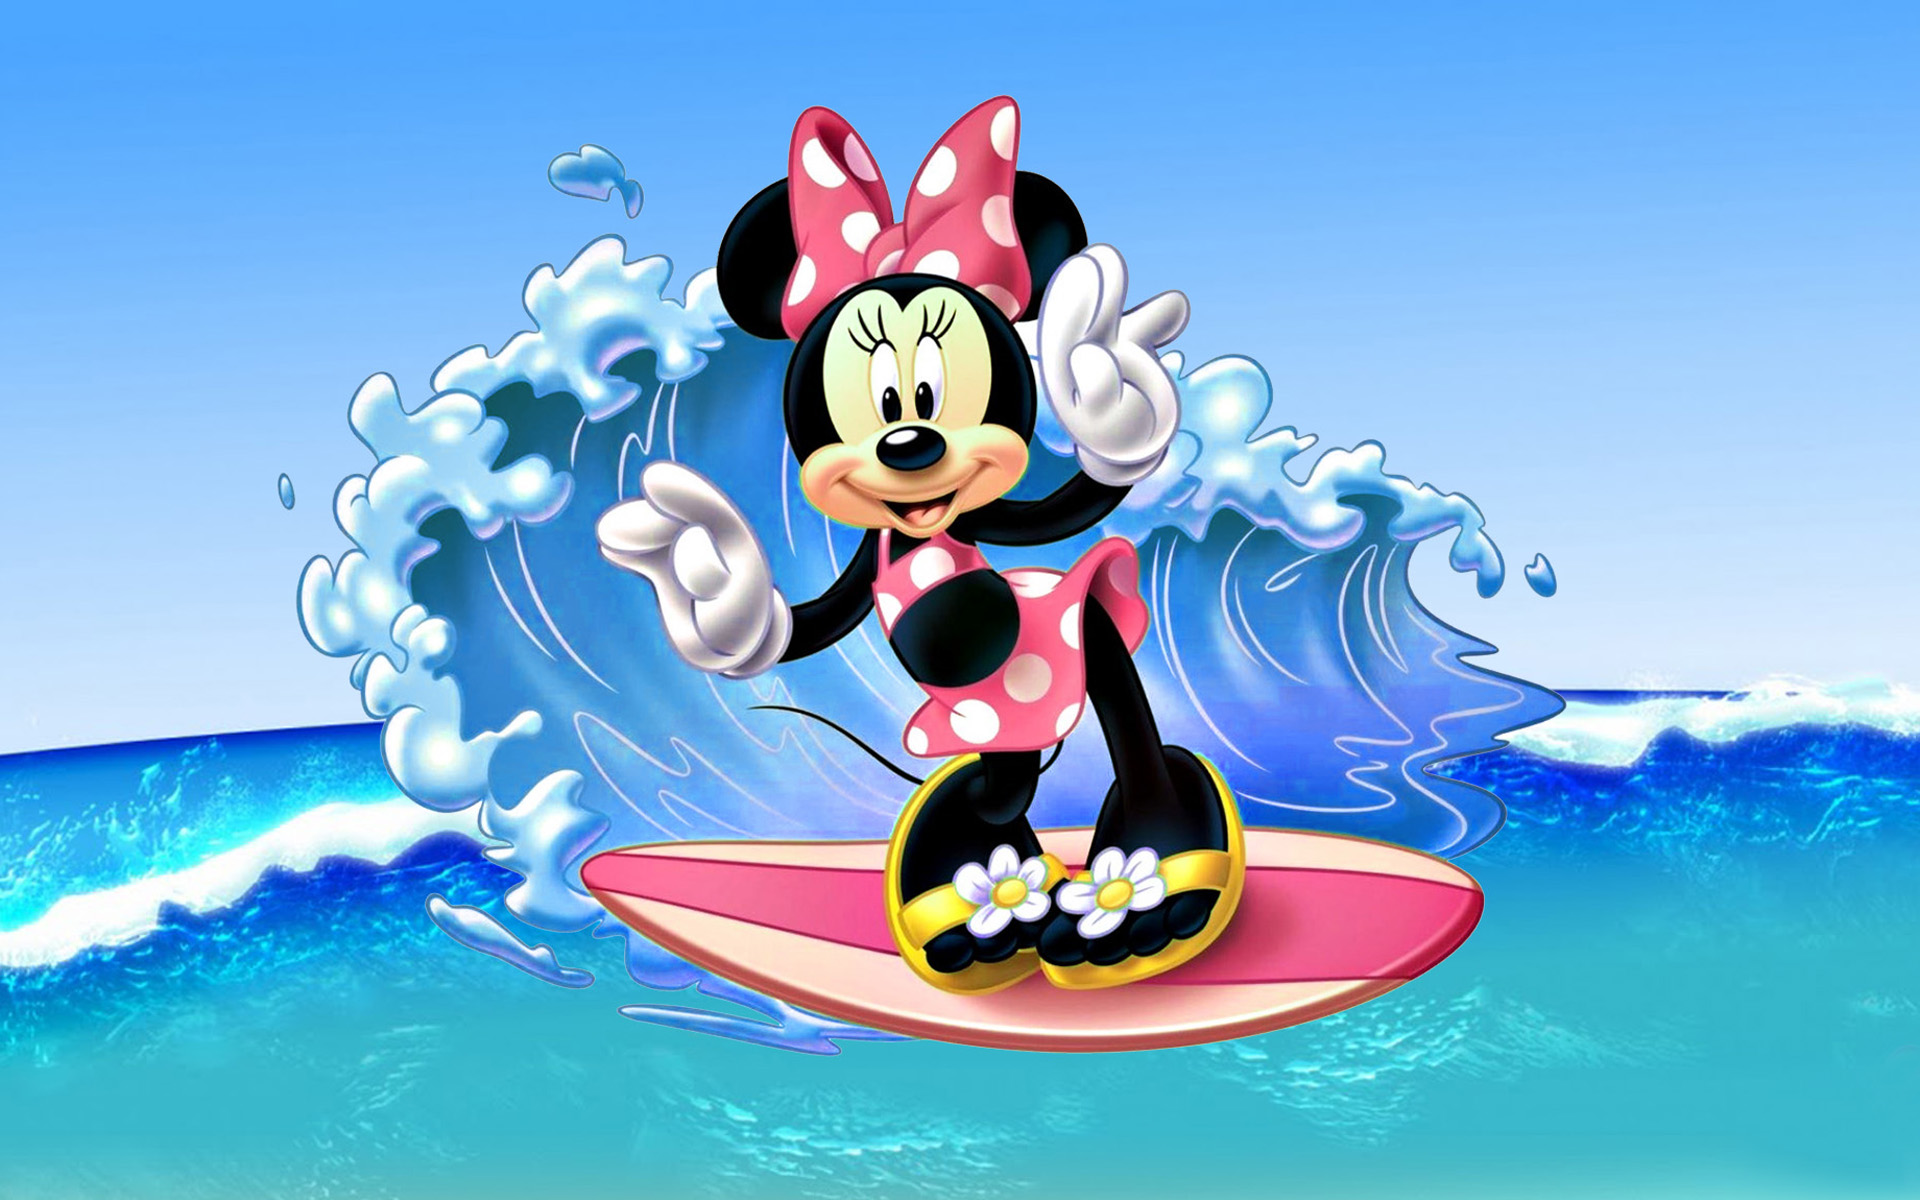 Free download Minnie Mouse Surfing Sea Waves Images Disney Wallpaper Hd [1920x1200] for your